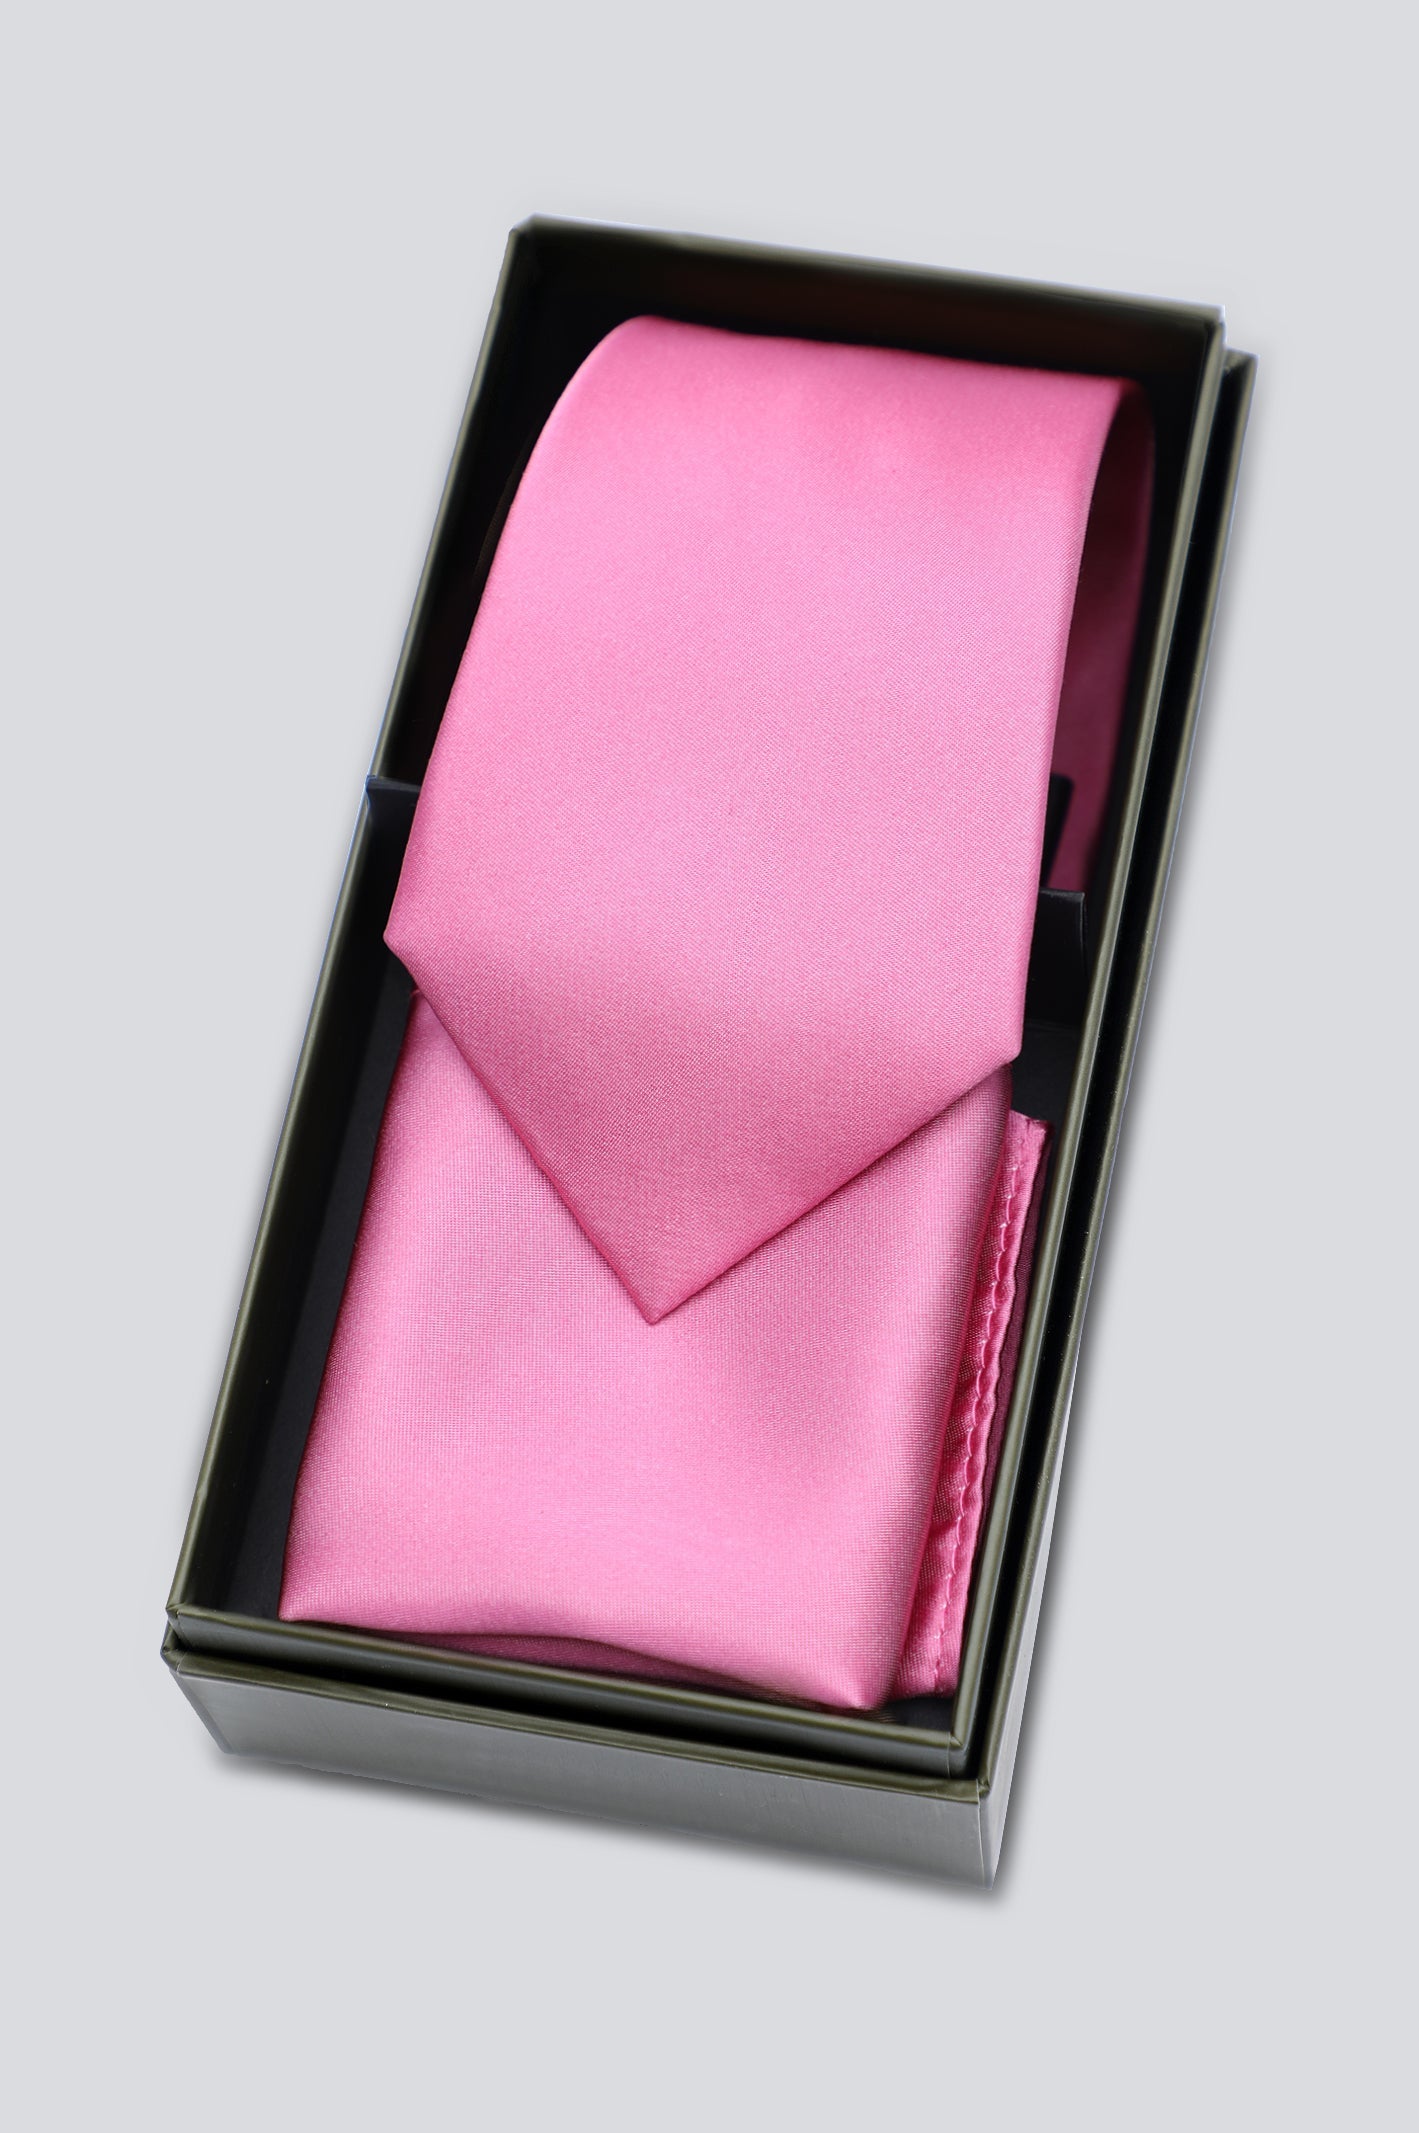 Pink Luxury Tie with Pocket Square